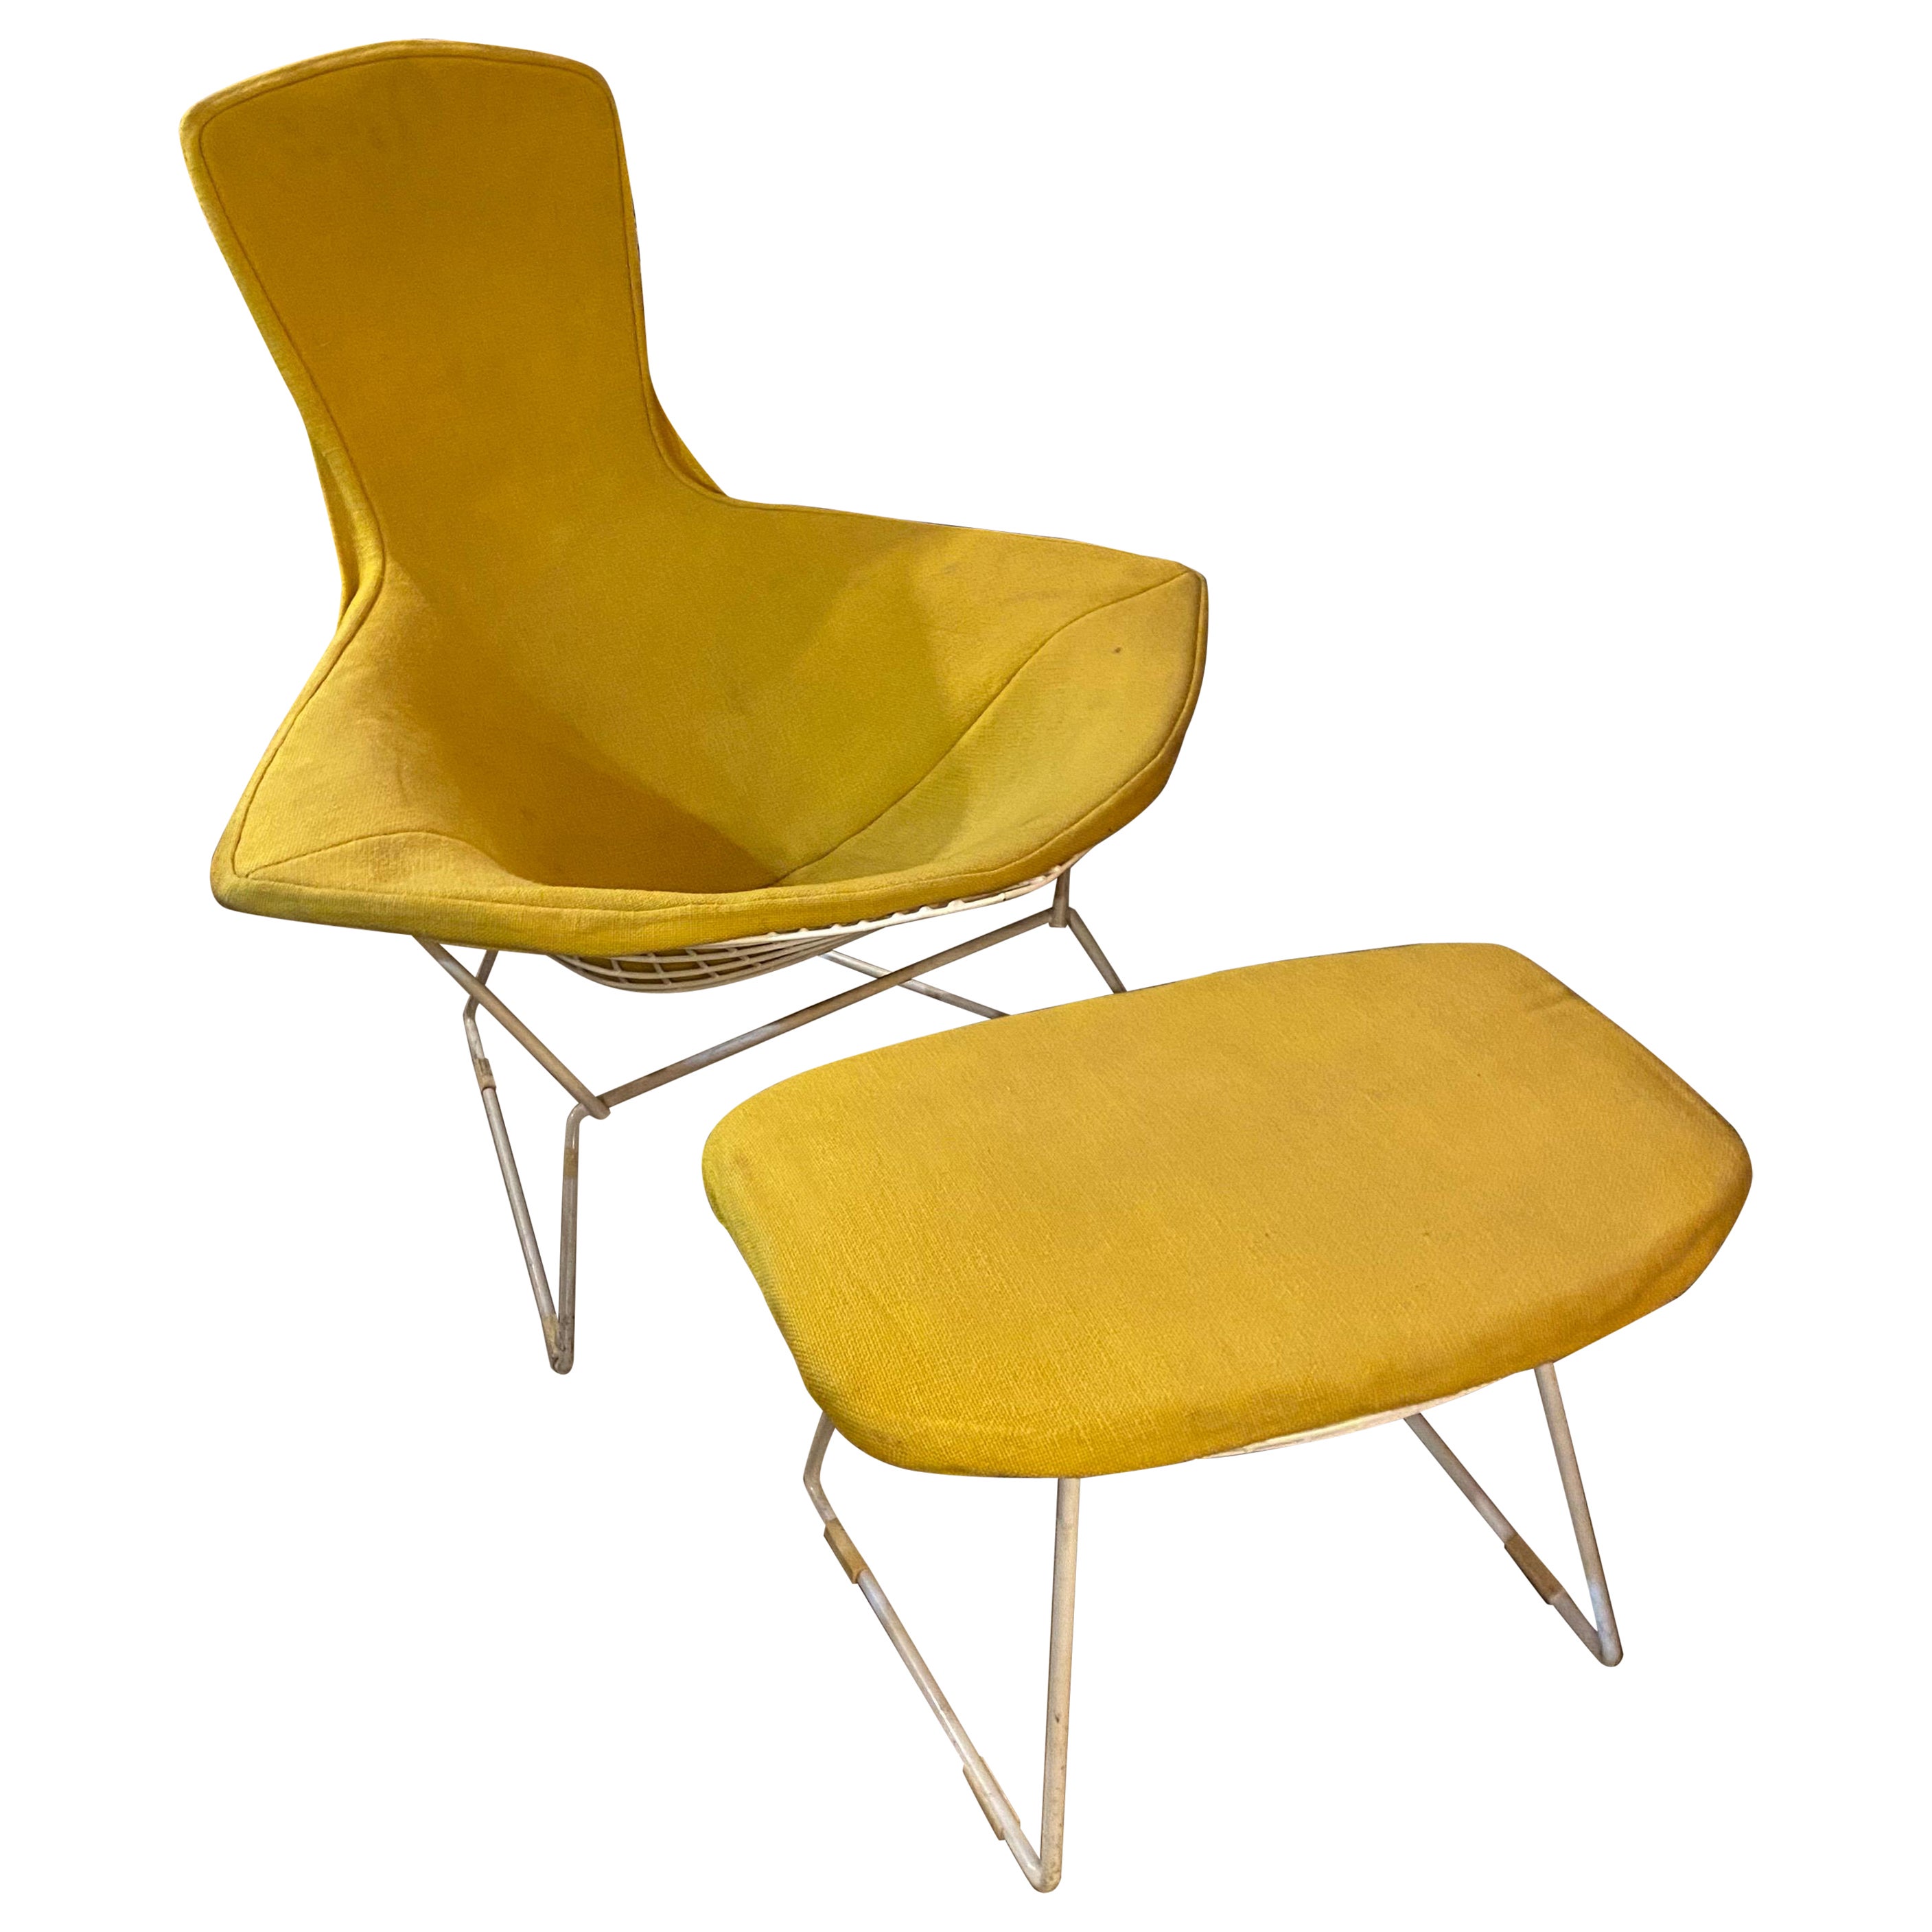 Bird Lounge Chair with Ottoman by Bertoia for Knoll, 1960s